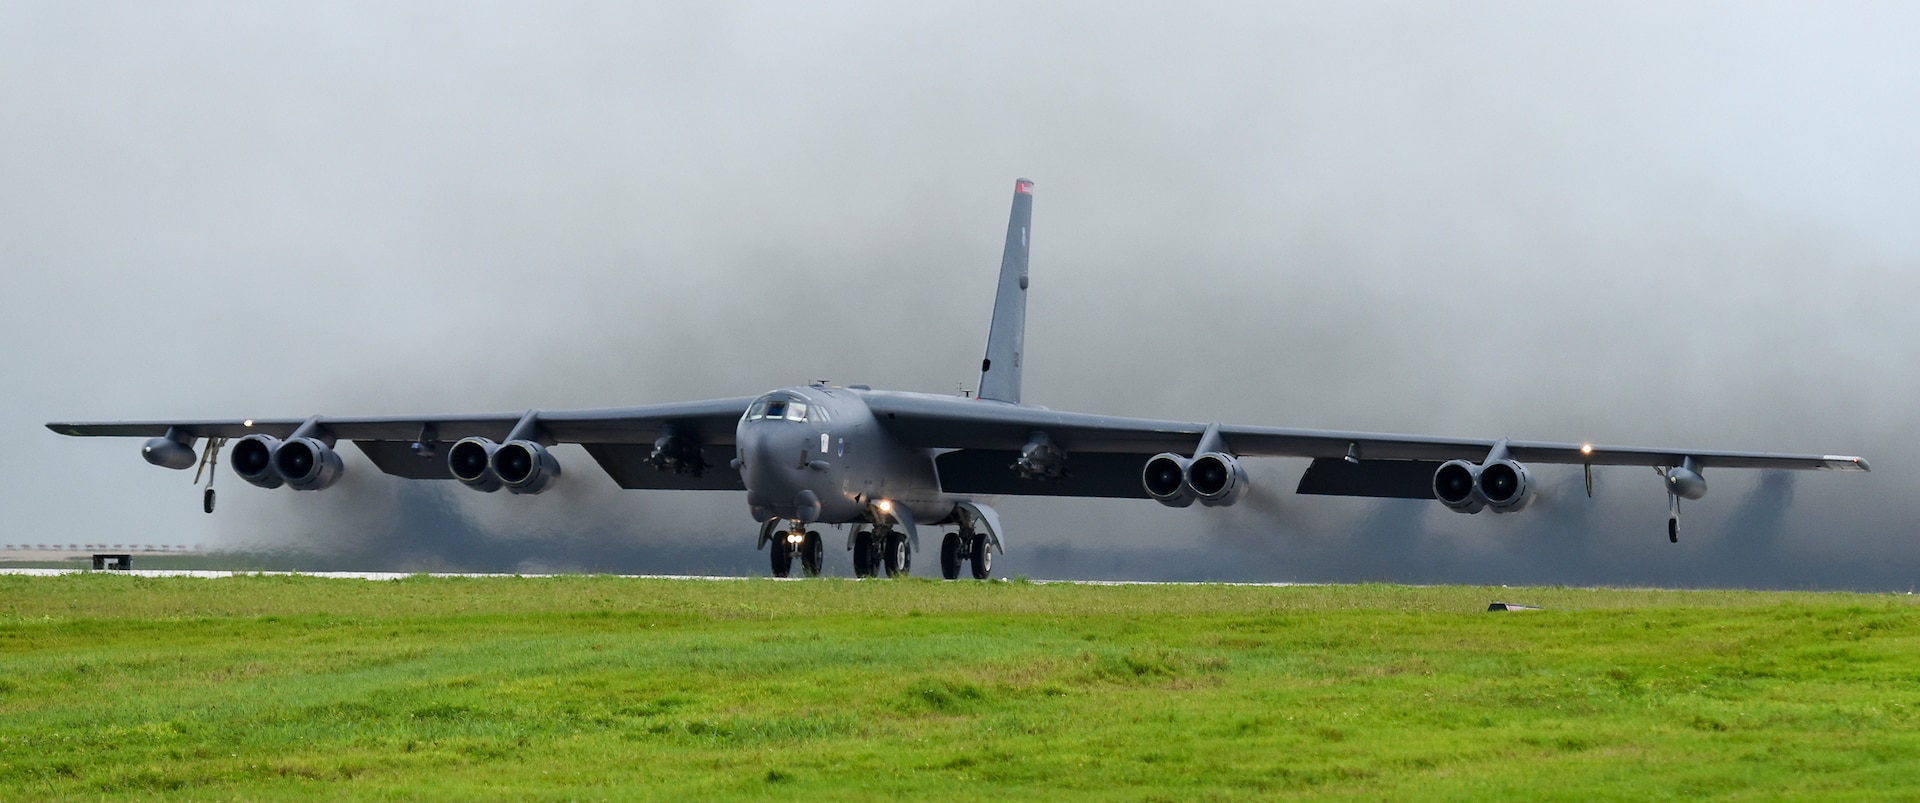 B-52 conduct missions over the South China Sea, Indian Ocean